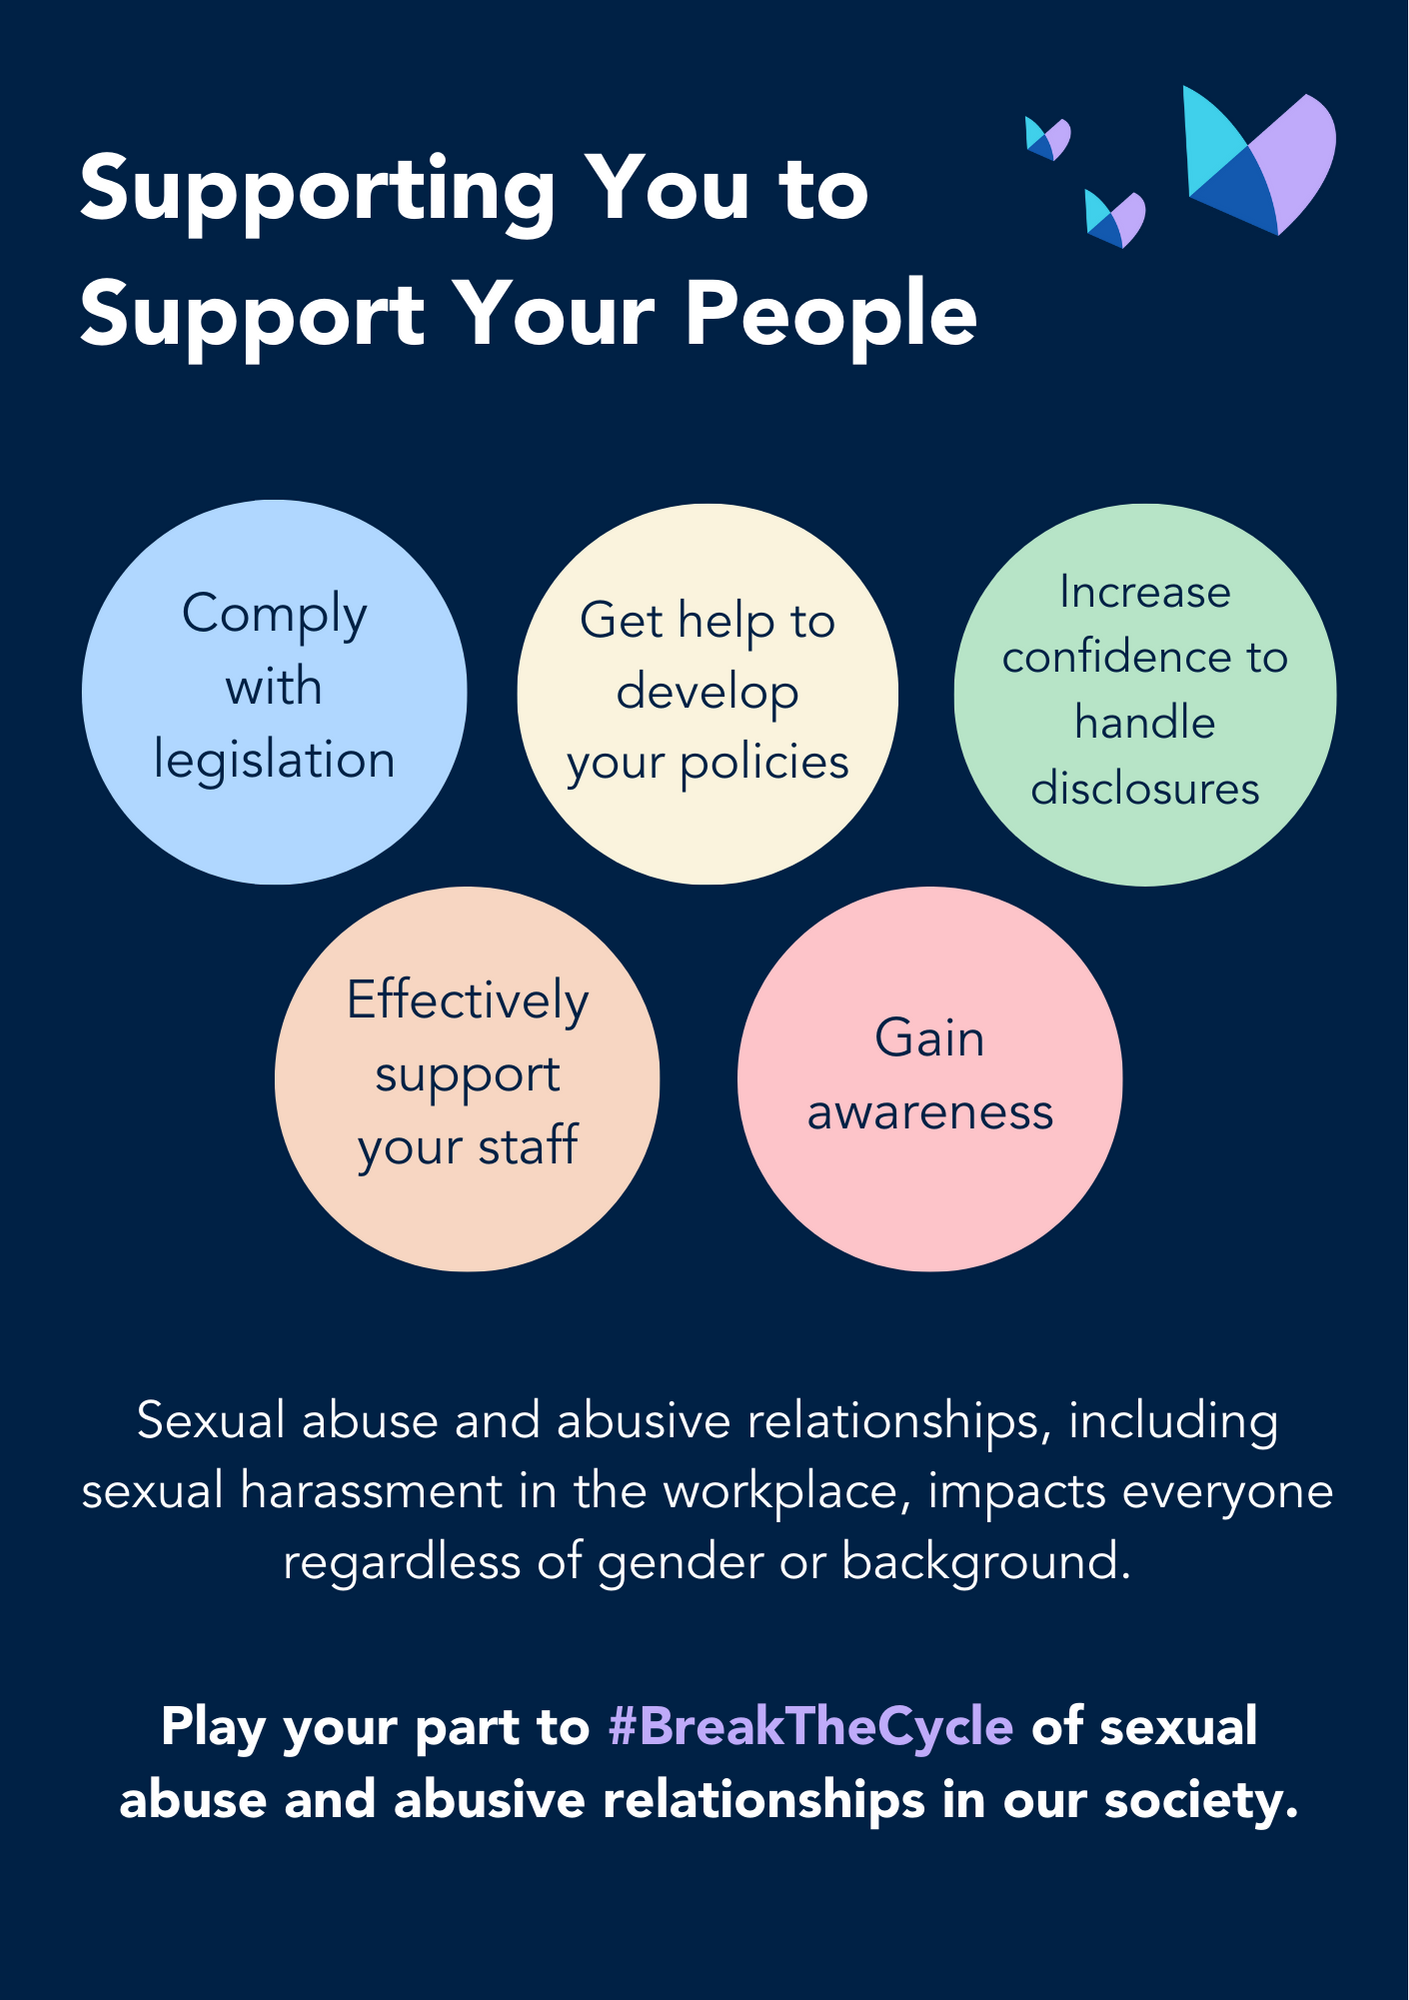 Supporting You to Support Your People</p>
<p>Comply with legislation<br />
Get help to develop your policies<br />
Increase confidence to handle disclosures<br />
Effectively support your staff<br />
Gain awareness</p>
<p>Sexual abuse and abusive relationships, including sexual harassment in the workplace, impacts everyone regardless of gender or background.</p>
<p>Play your part to #BreakTheCycle of sexual abuse and abusive relationships in our society.